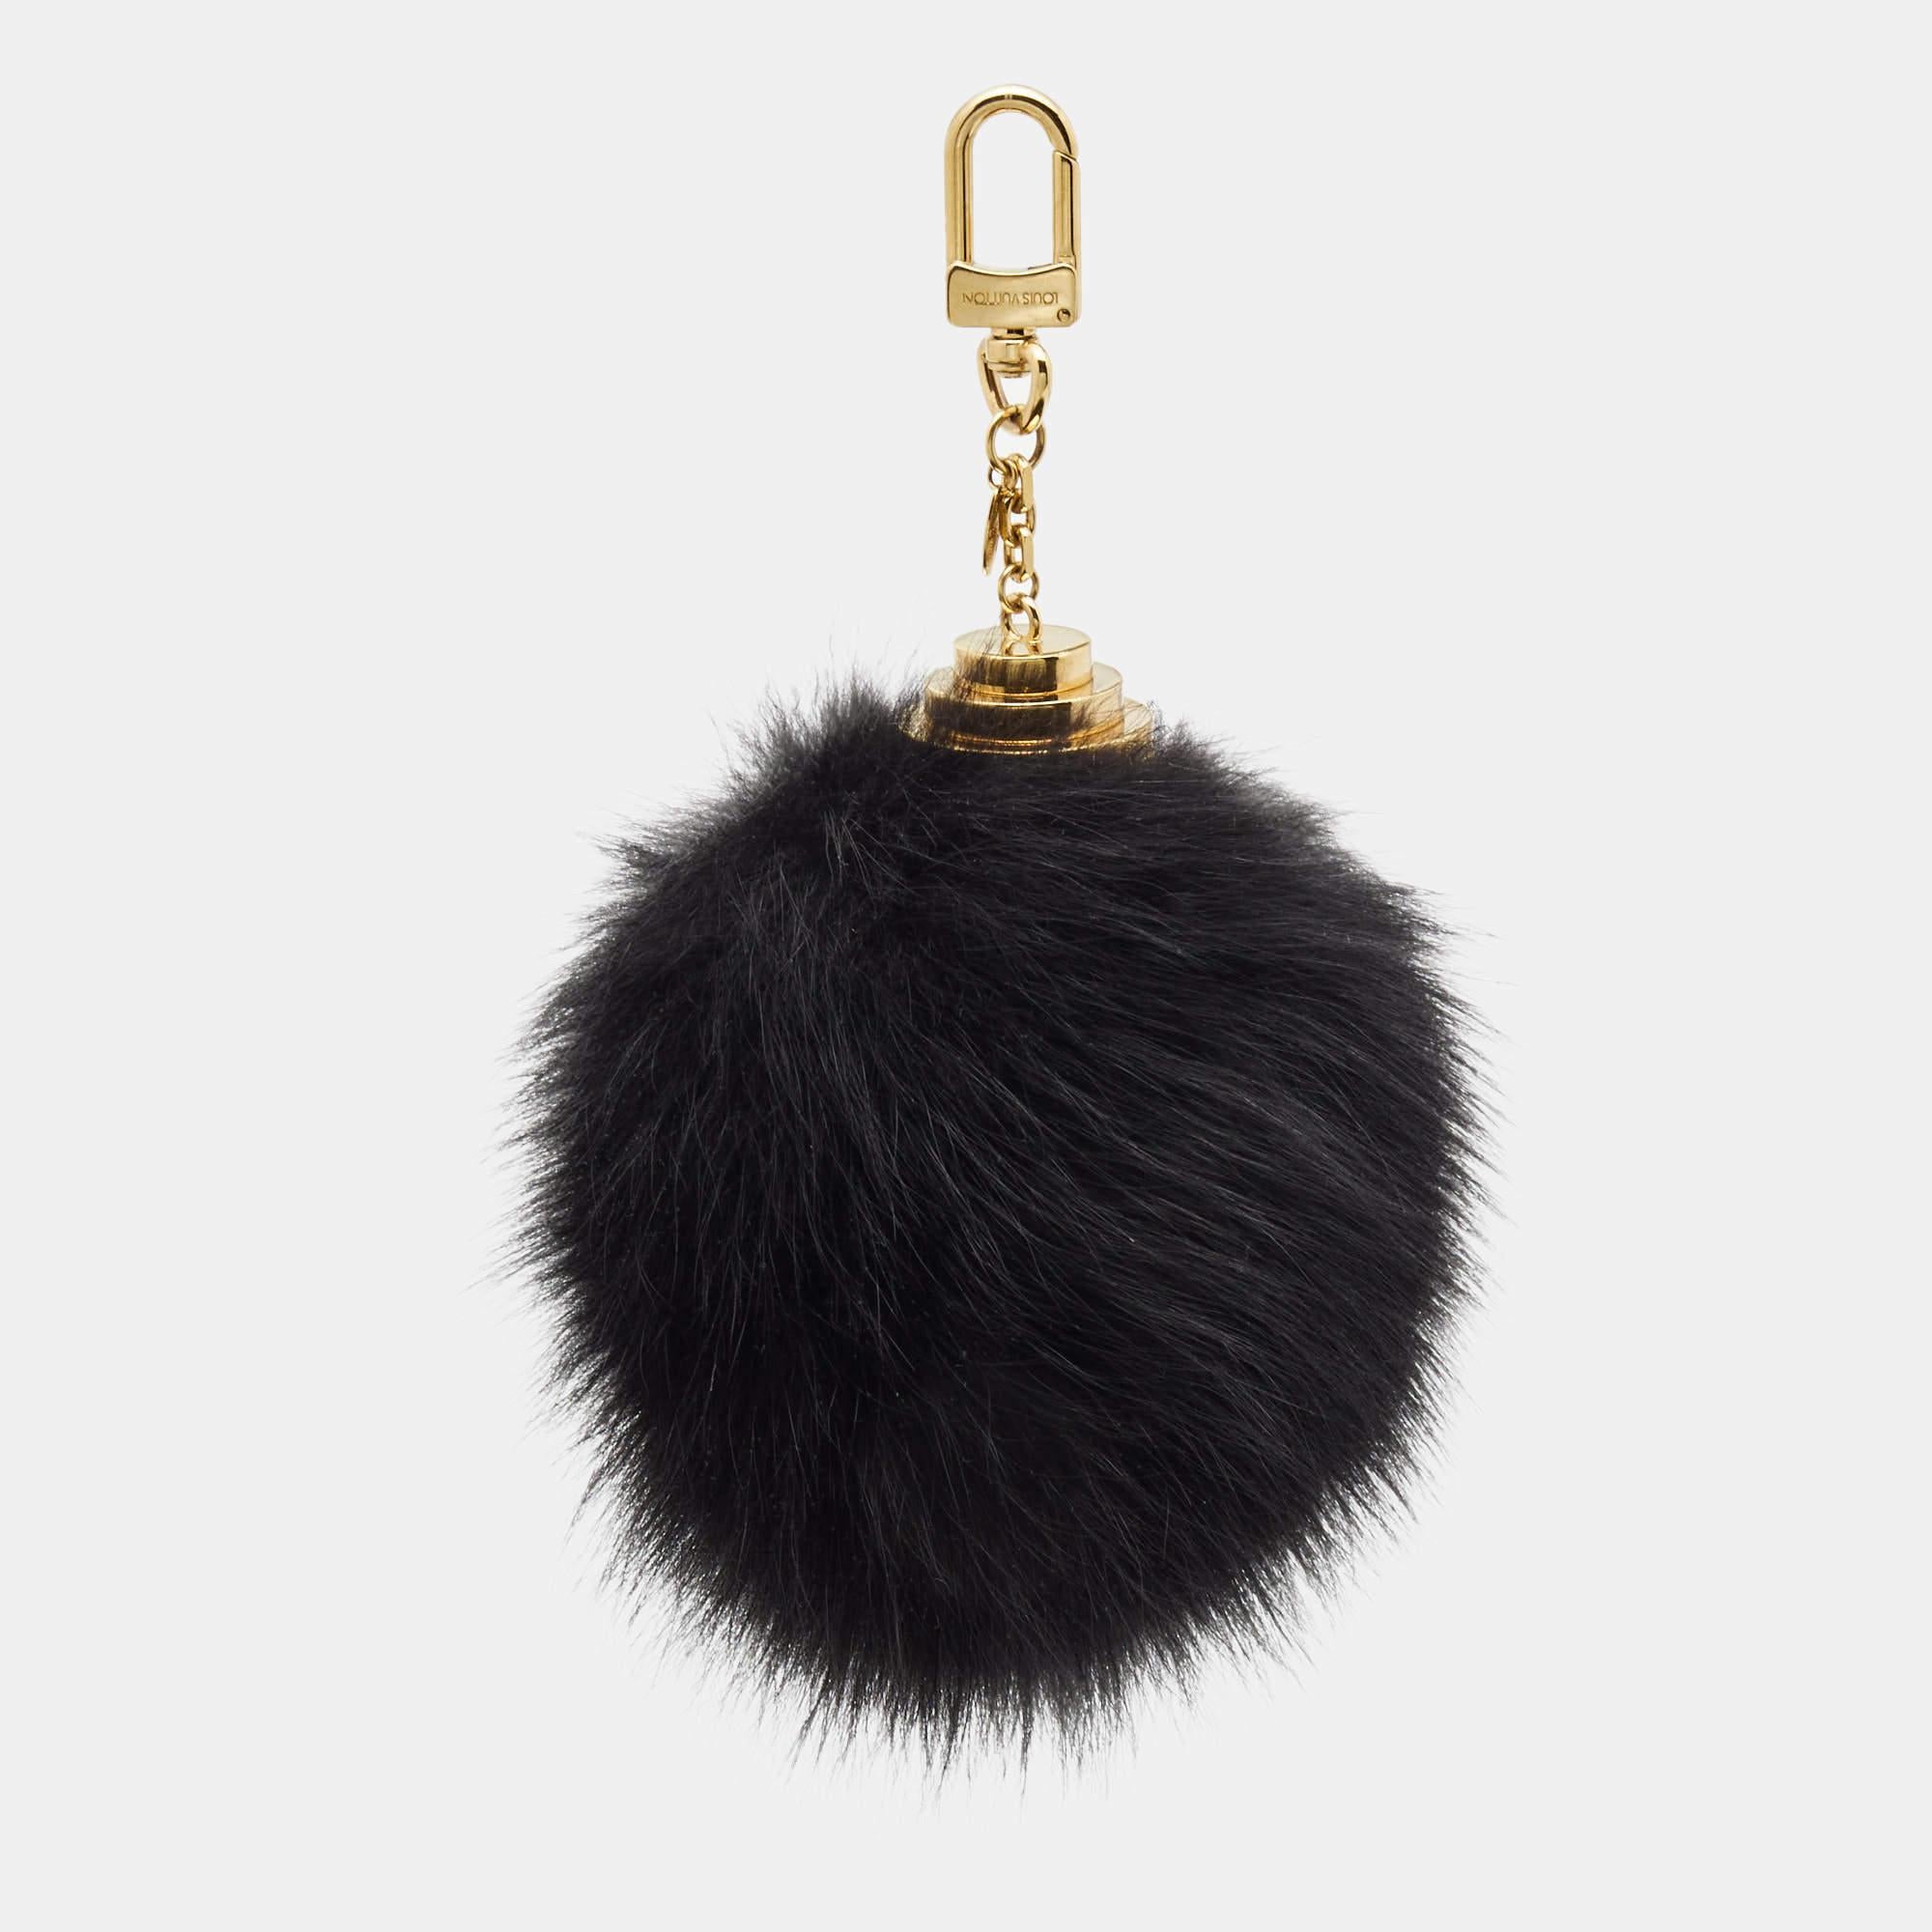 The Louis Vuitton key holder is a luxurious accessory crafted from premium black mink fur. It features the iconic LV monogram pattern in gold-tone hardware and a secure key ring attachment. This elegant piece adds sophistication and style to your